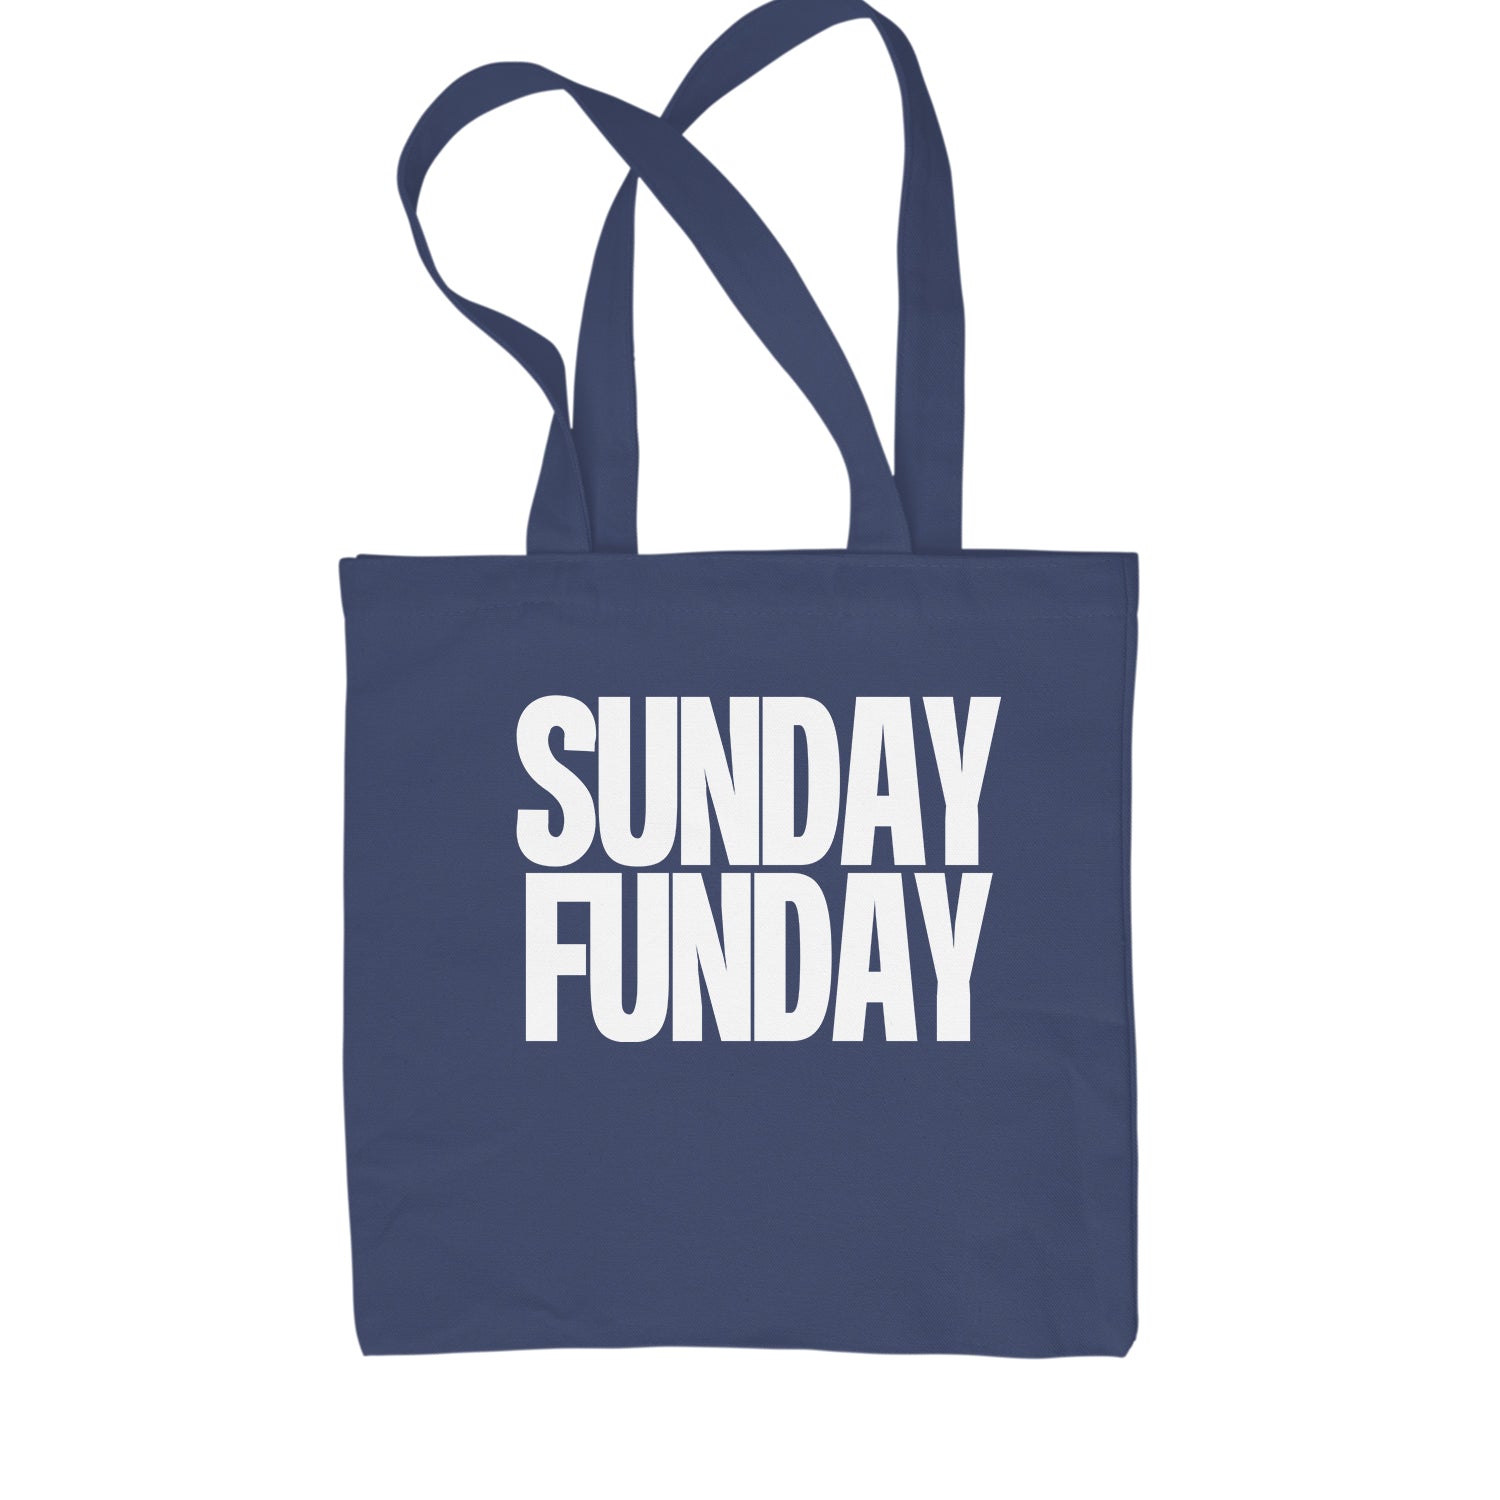 Sunday Funday Shopping Tote Bag day, drinking, fun, funday, partying, sun, Sunday by Expression Tees